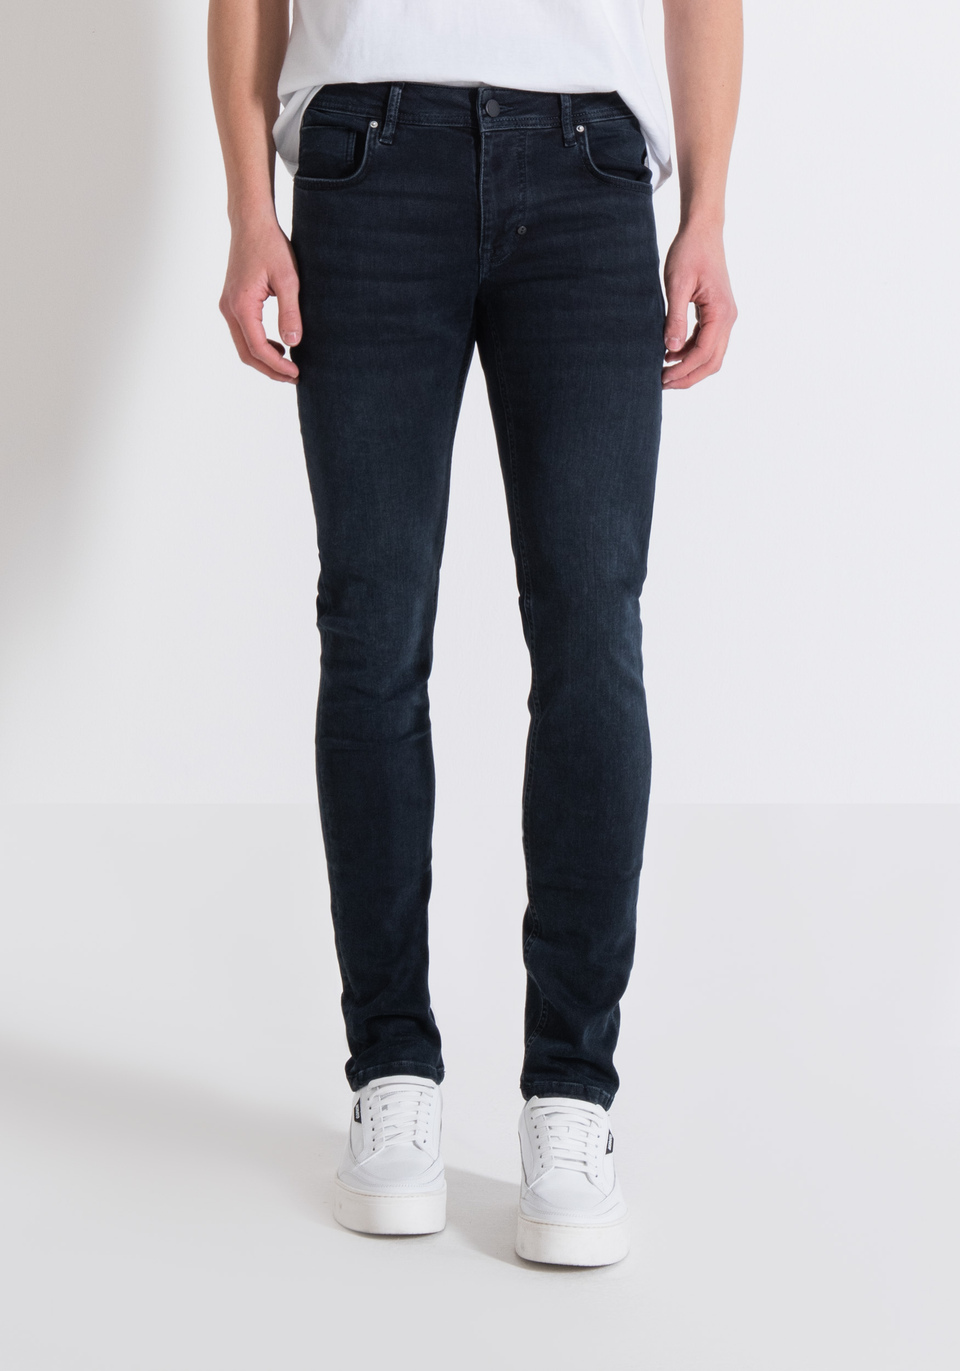 "OZZY" TAPERED FIT JEANS IN STRETCH DENIM WITH DARK WASH - Antony Morato Online Shop